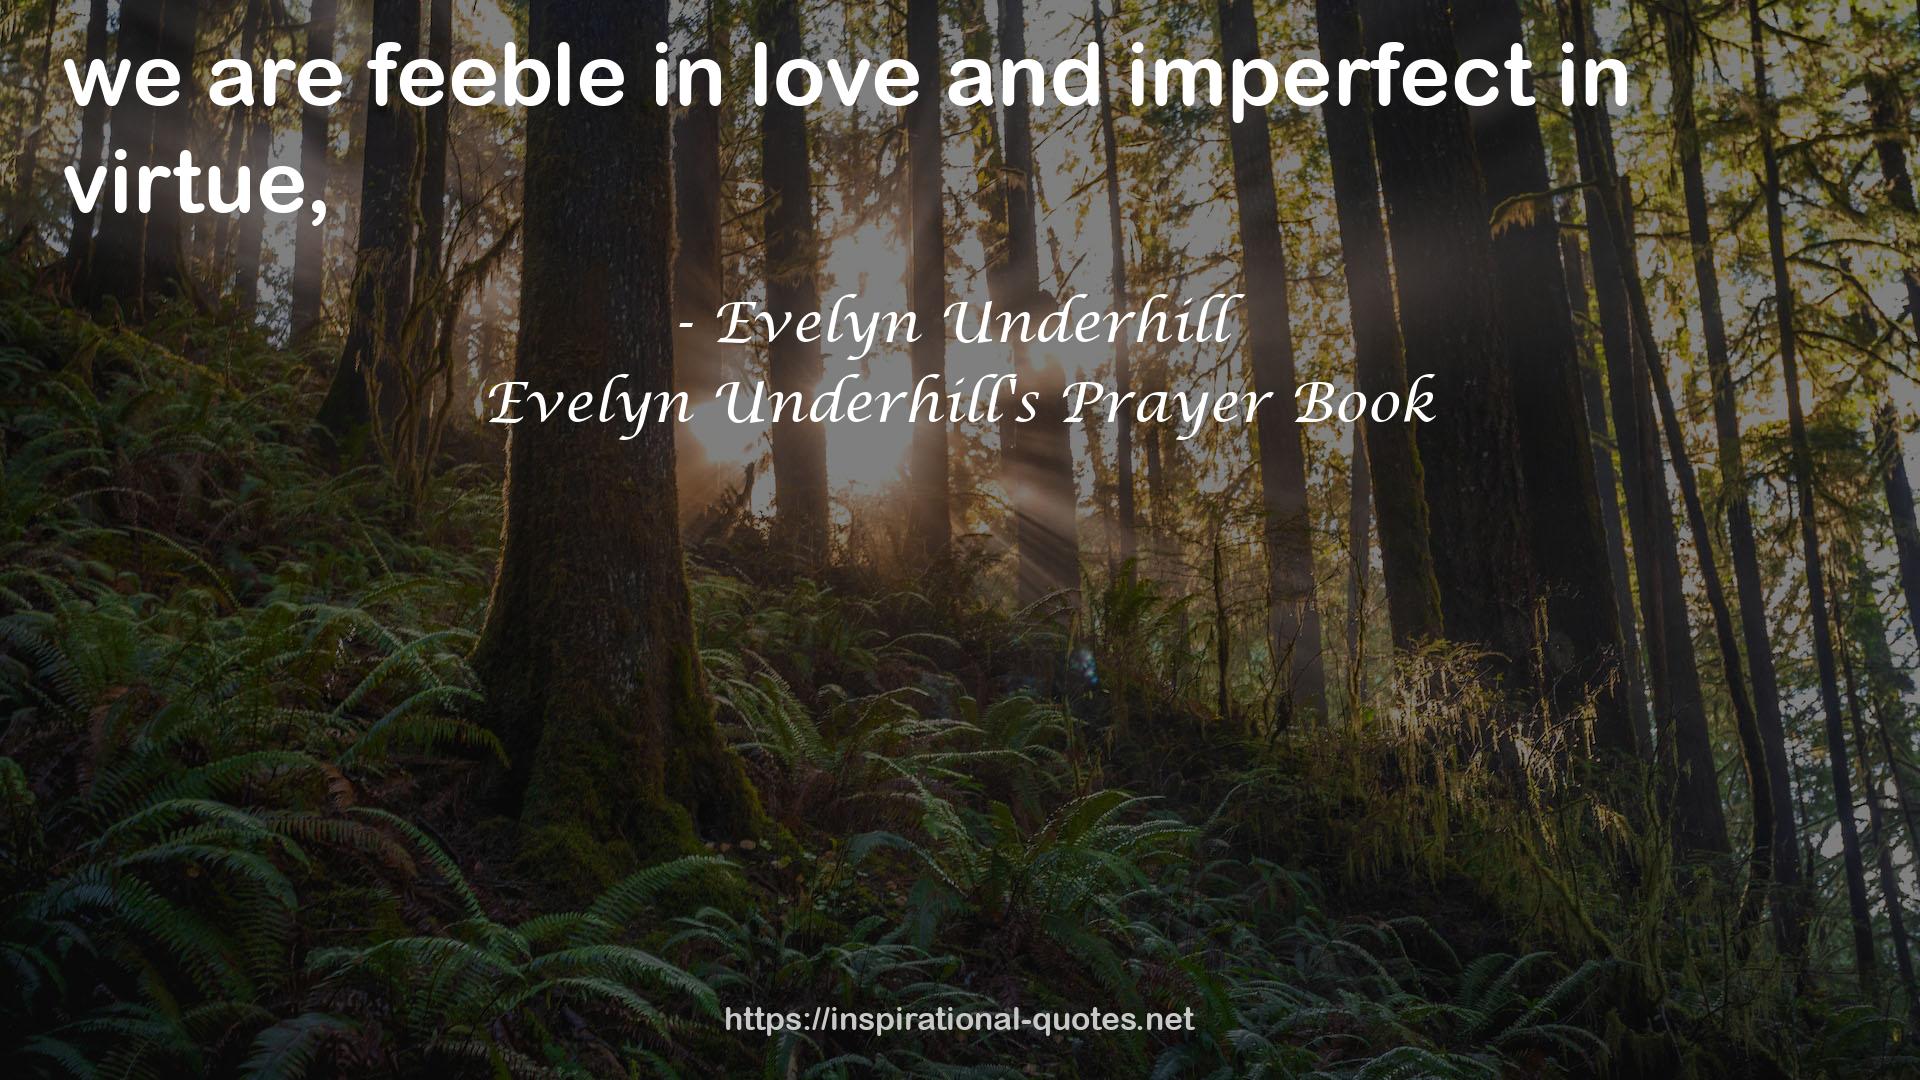 Evelyn Underhill's Prayer Book QUOTES